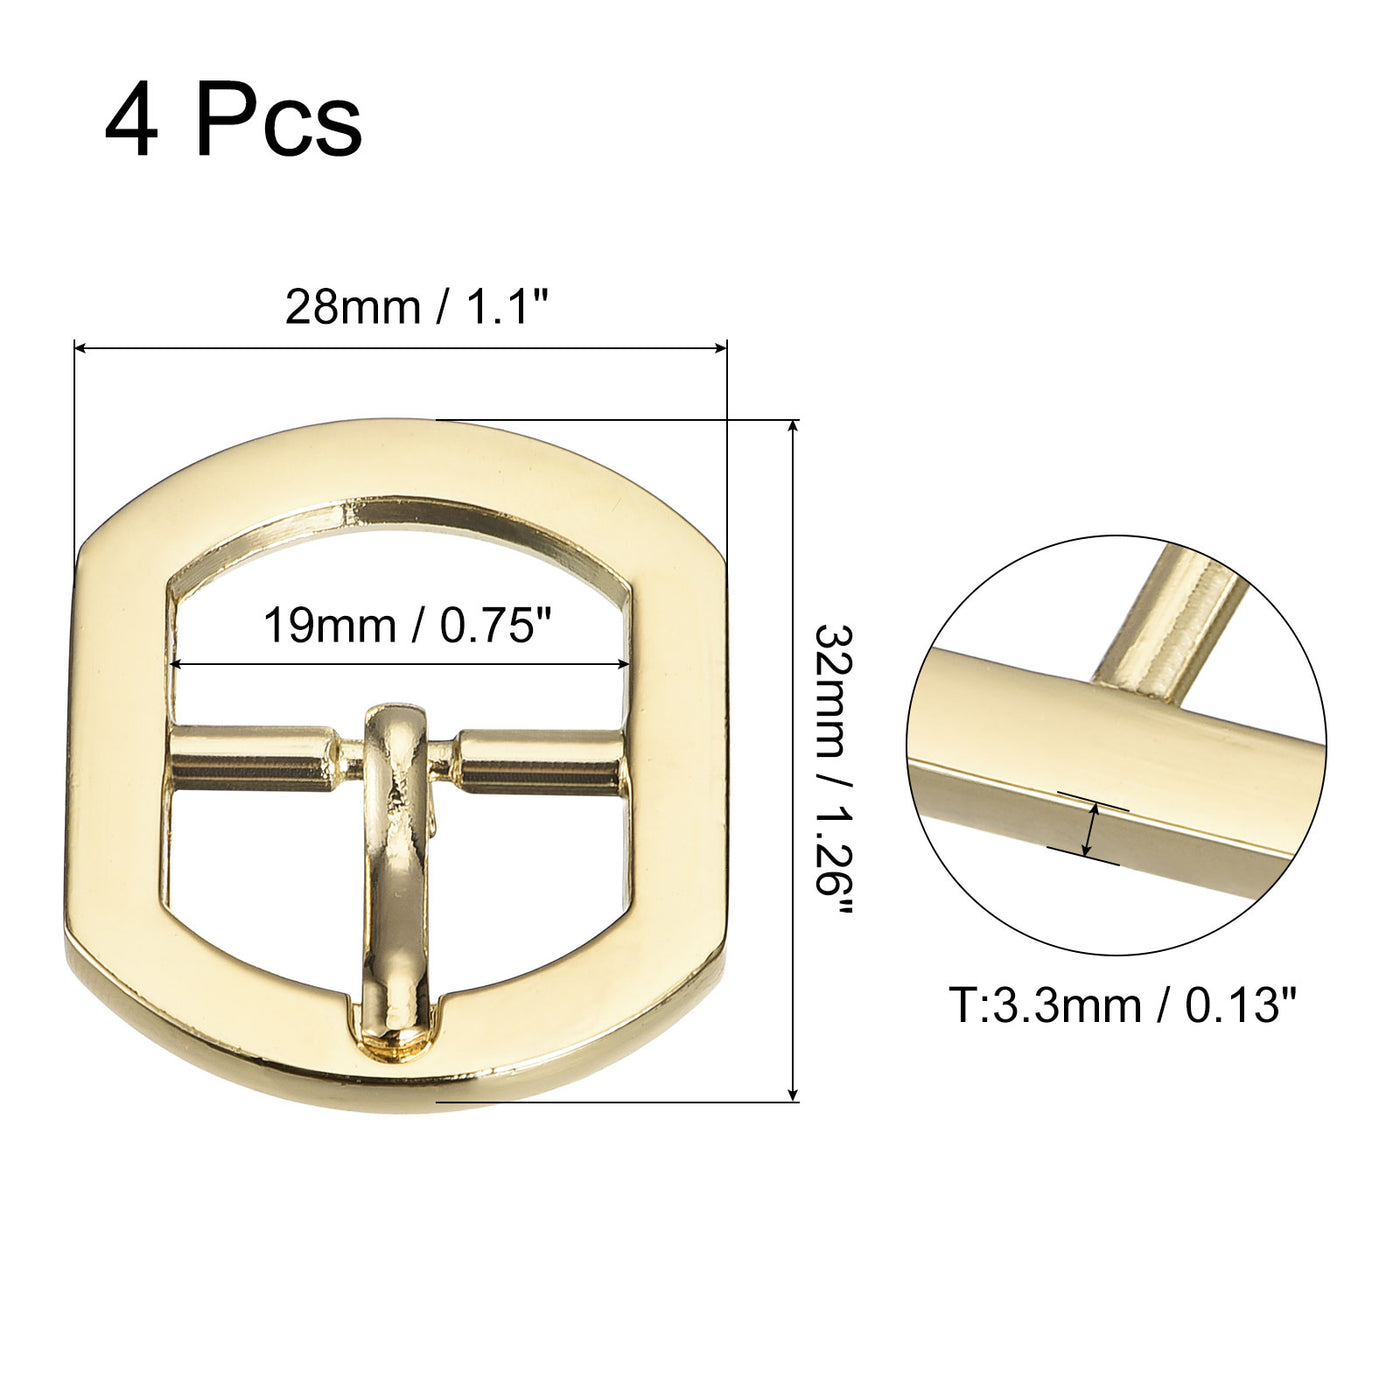 uxcell Uxcell 4Pcs 0.75" Single Prong Belt Buckle Square Center Bar Buckles for Belt, Gold